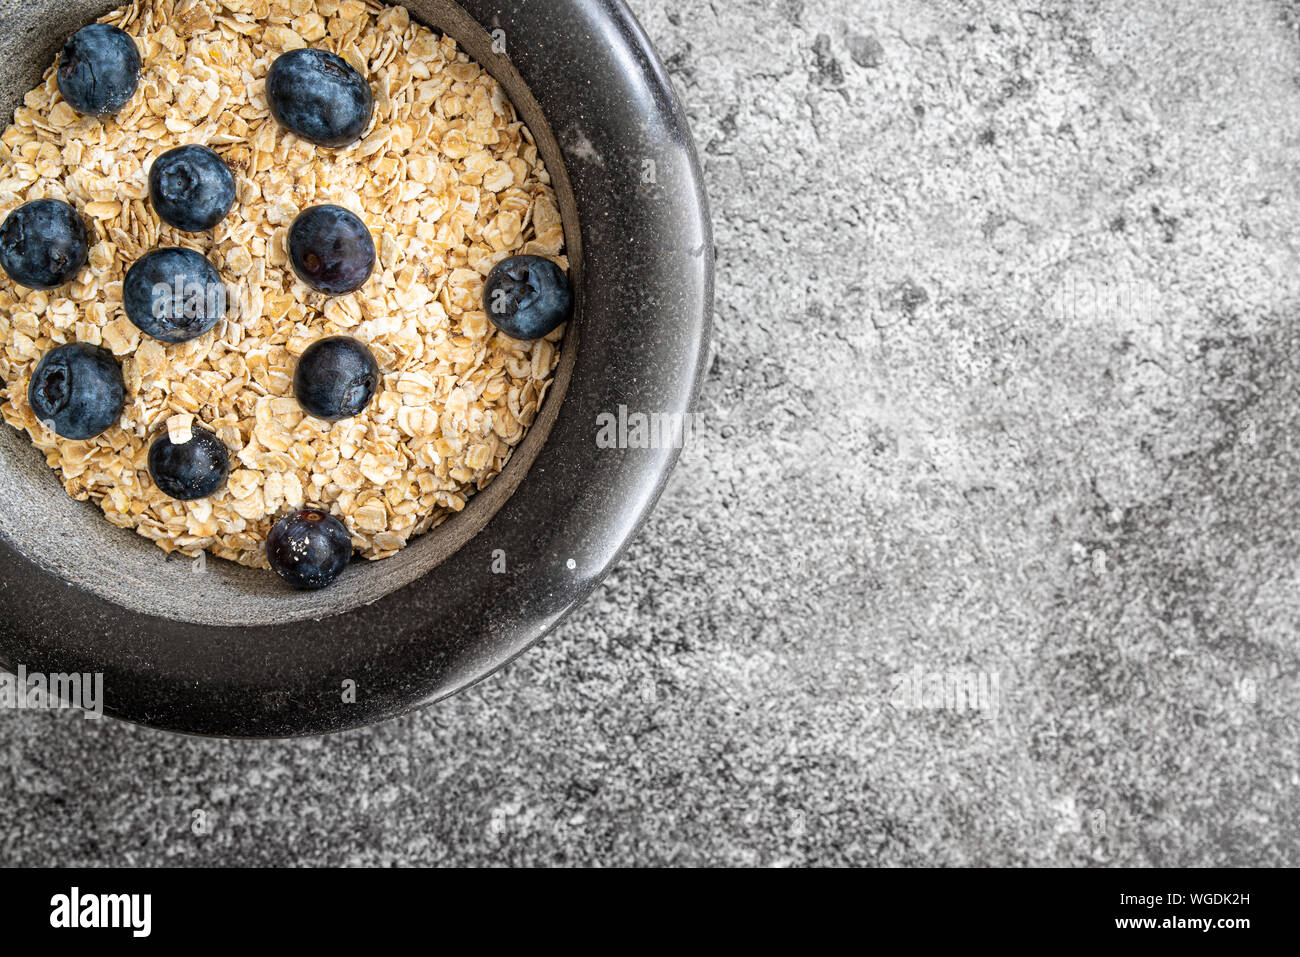 top view of rolled oats, oatmeal and blueberries in stone bowl on kitchen counter Stock Photo